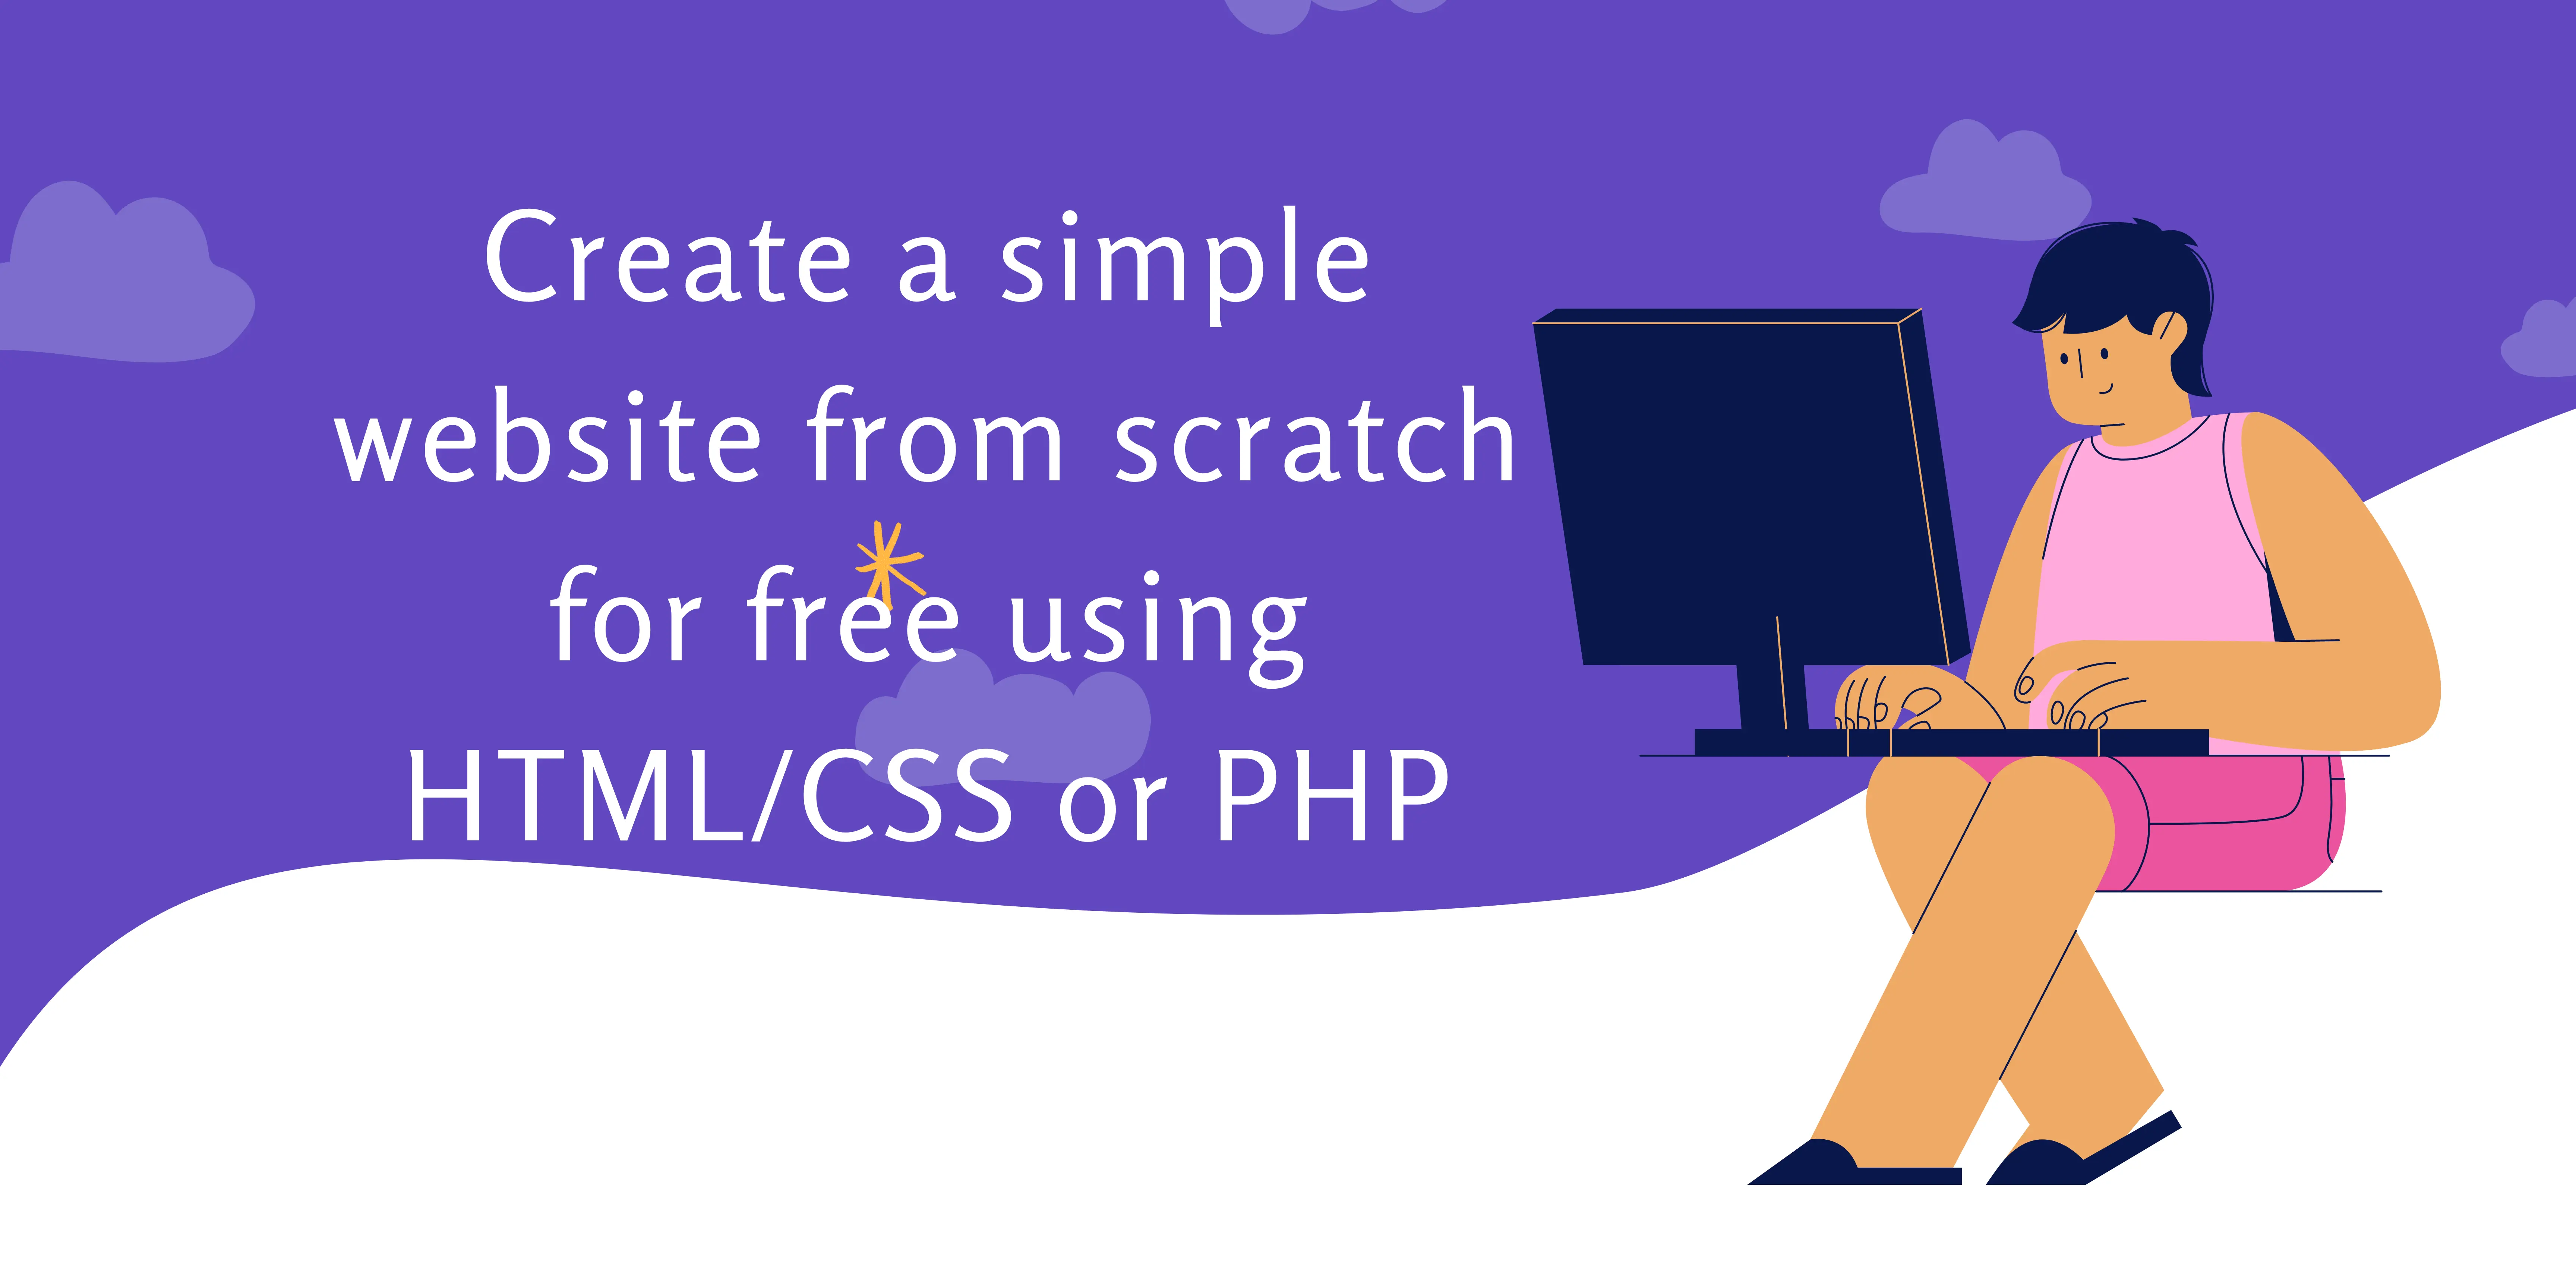 Create a simple website from scratch for free using HTML/CSS or PHP